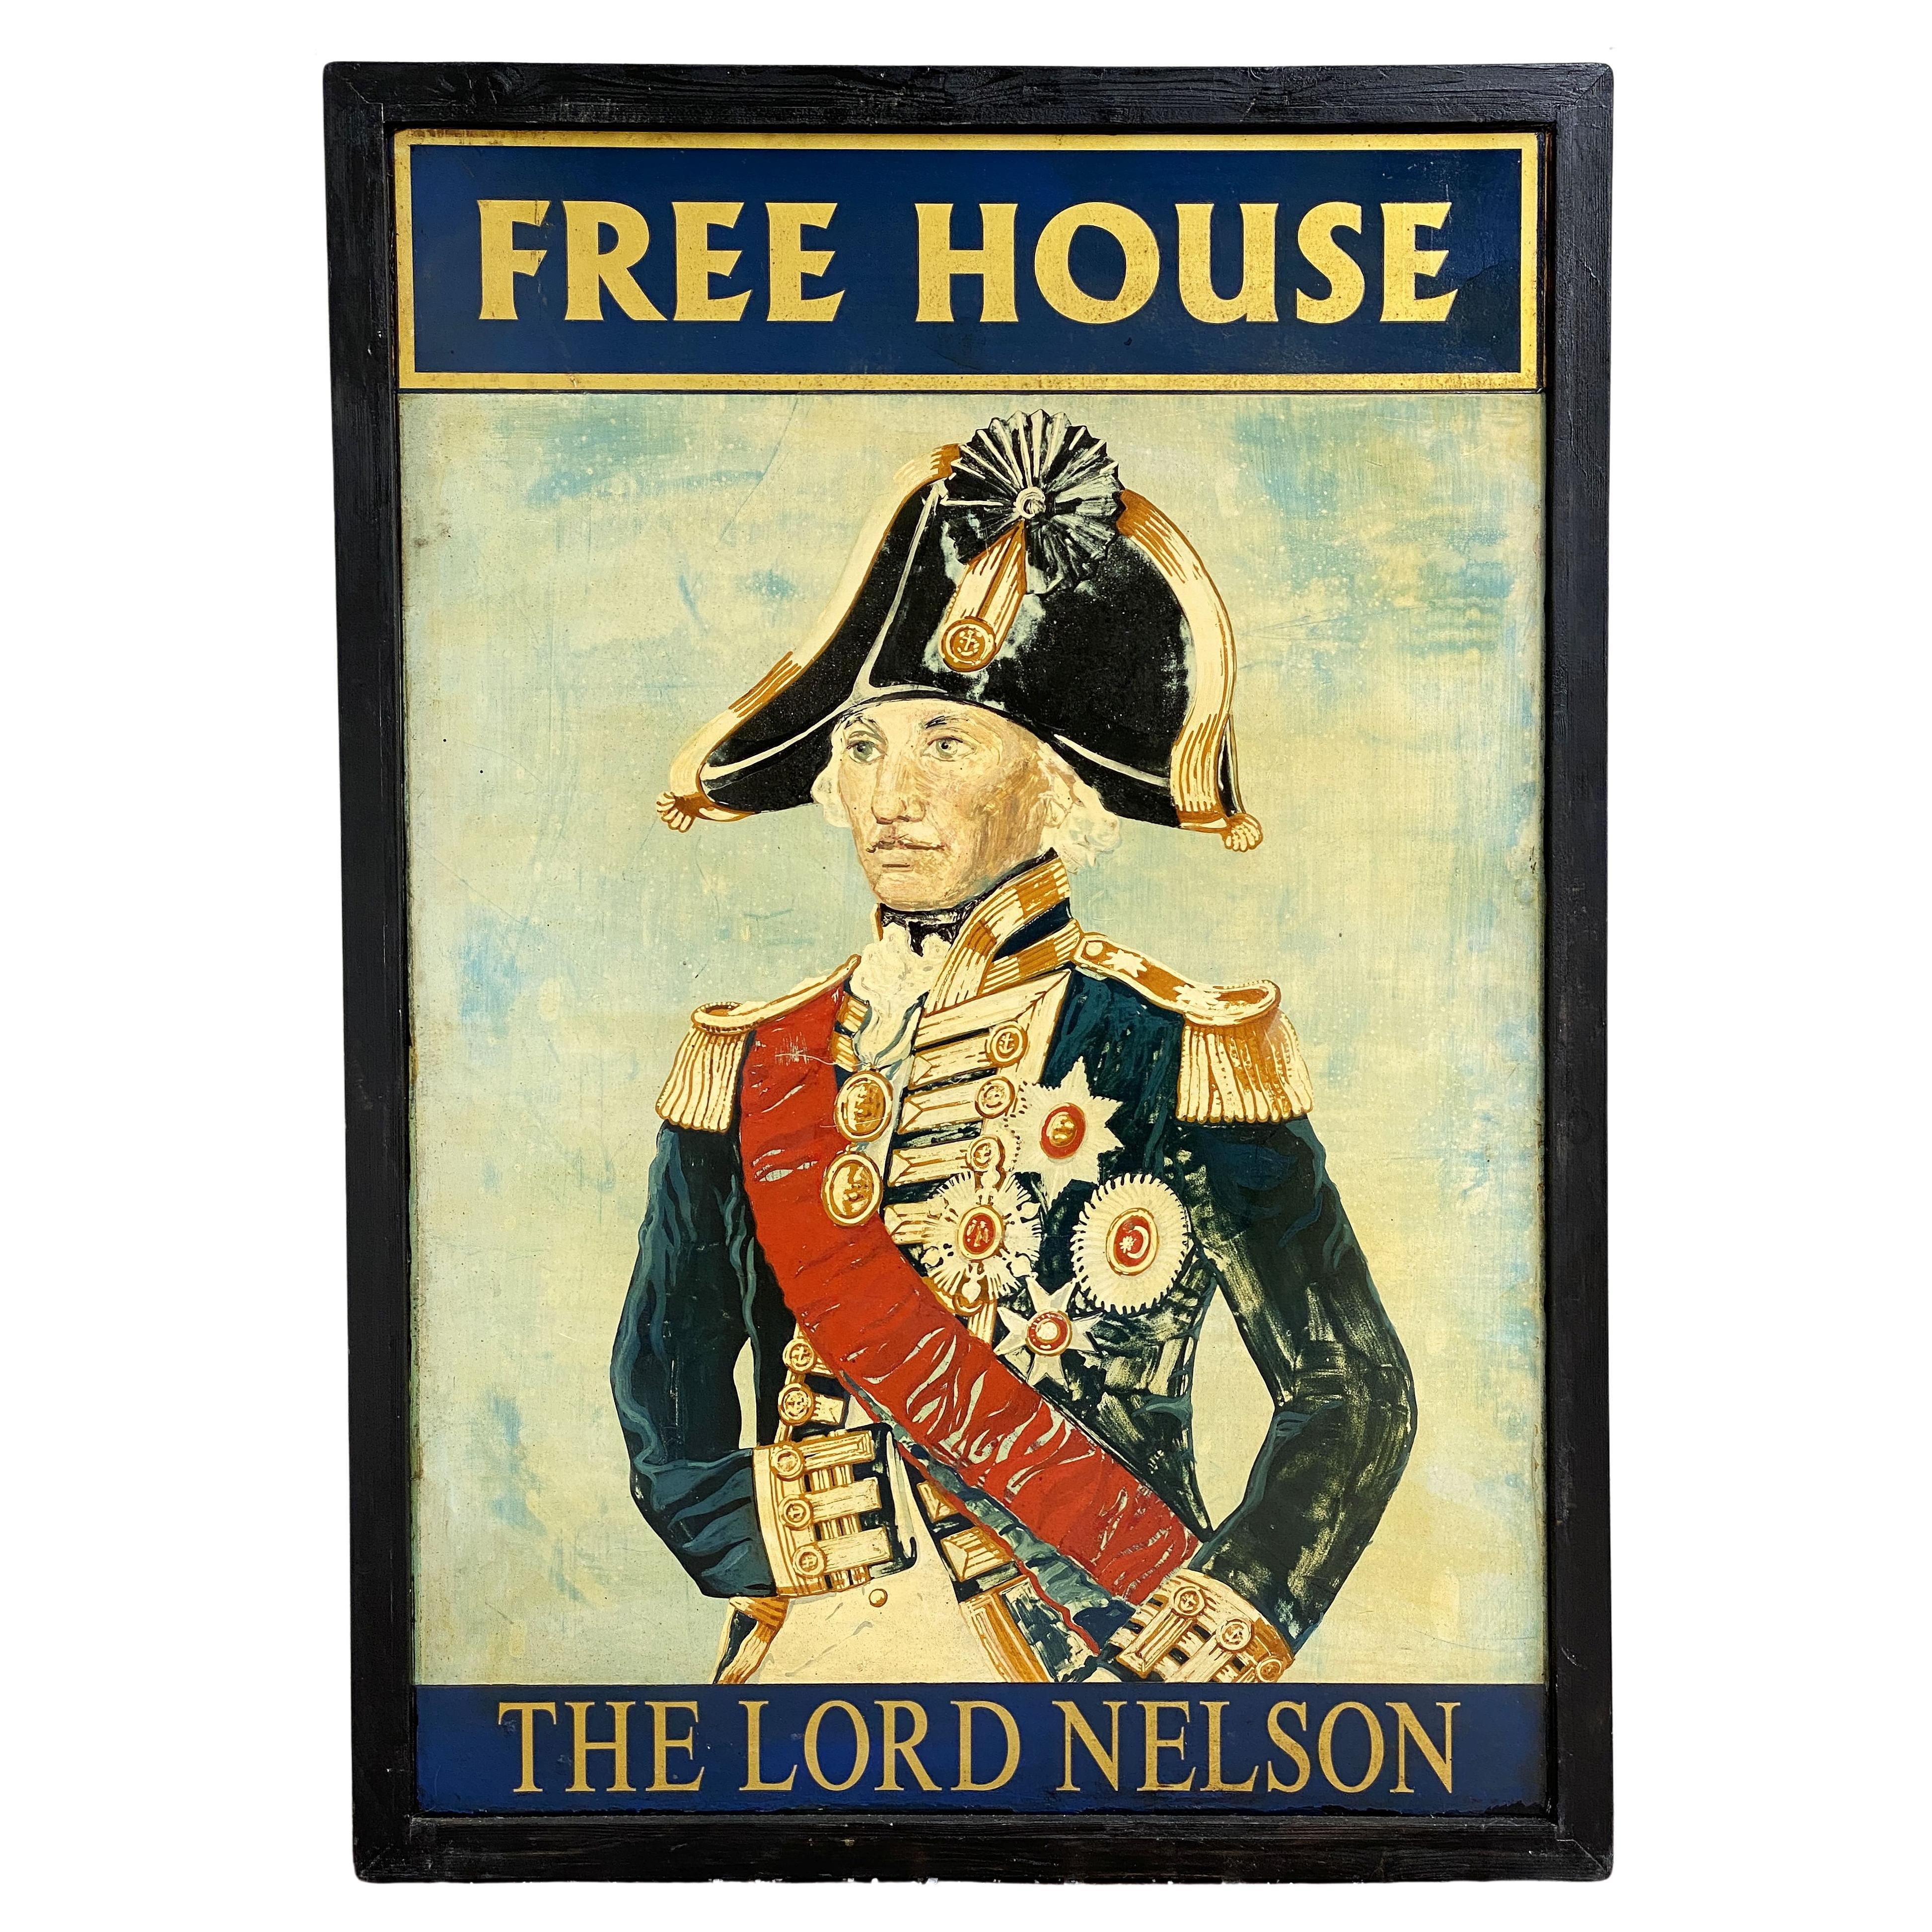 Signe de pub anglaise, Free House - The Lord Nelson